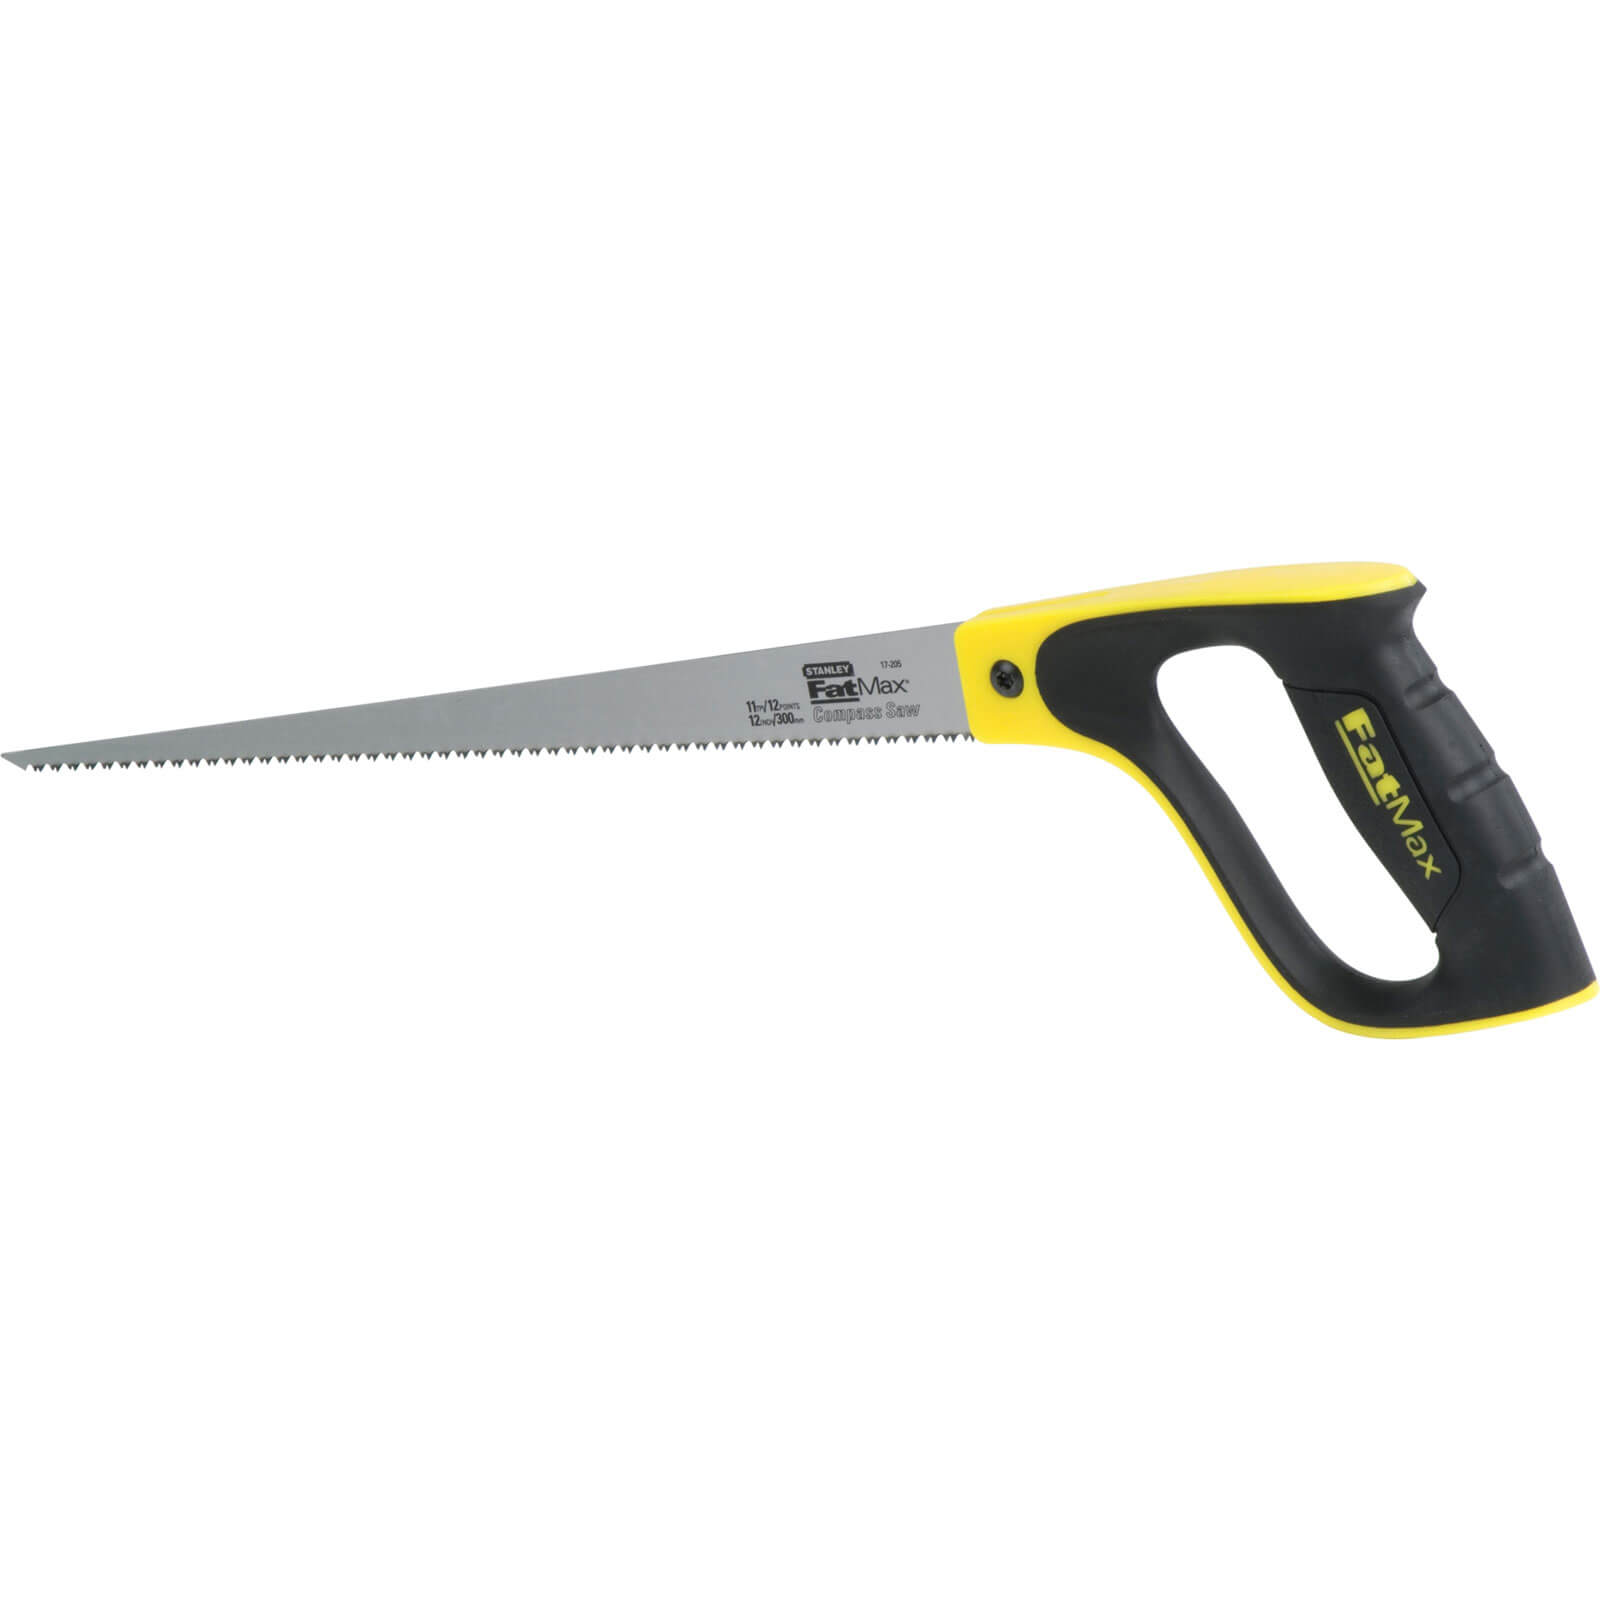 Image of Stanley FatMax Compass Saw 12" / 300mm 11tpi